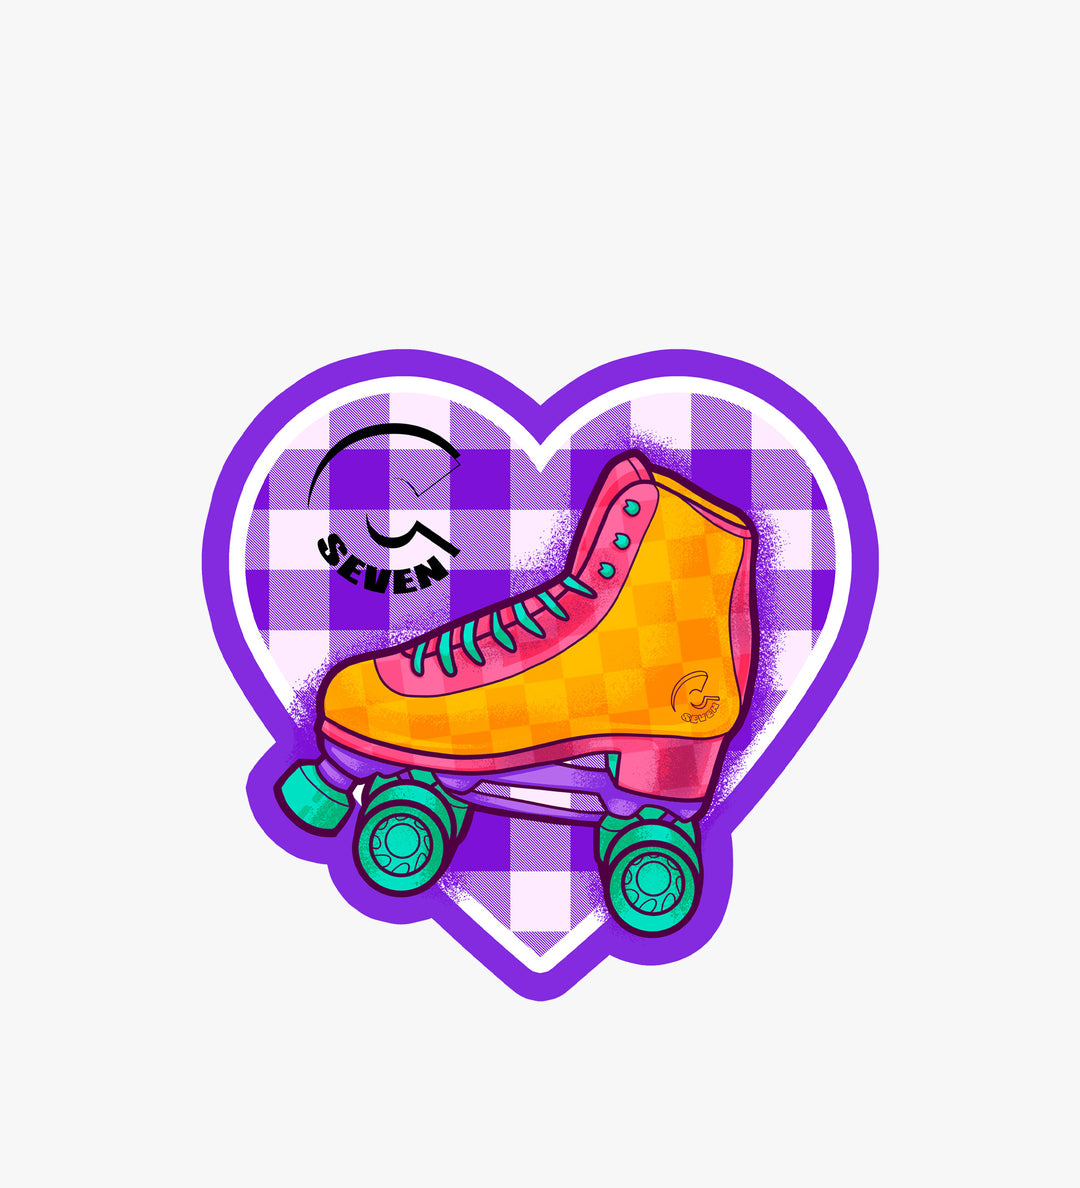 C7skates Love to Skate decorative heart sticker with purple and orange details: 3 x 3-inches in a matte finish print. 